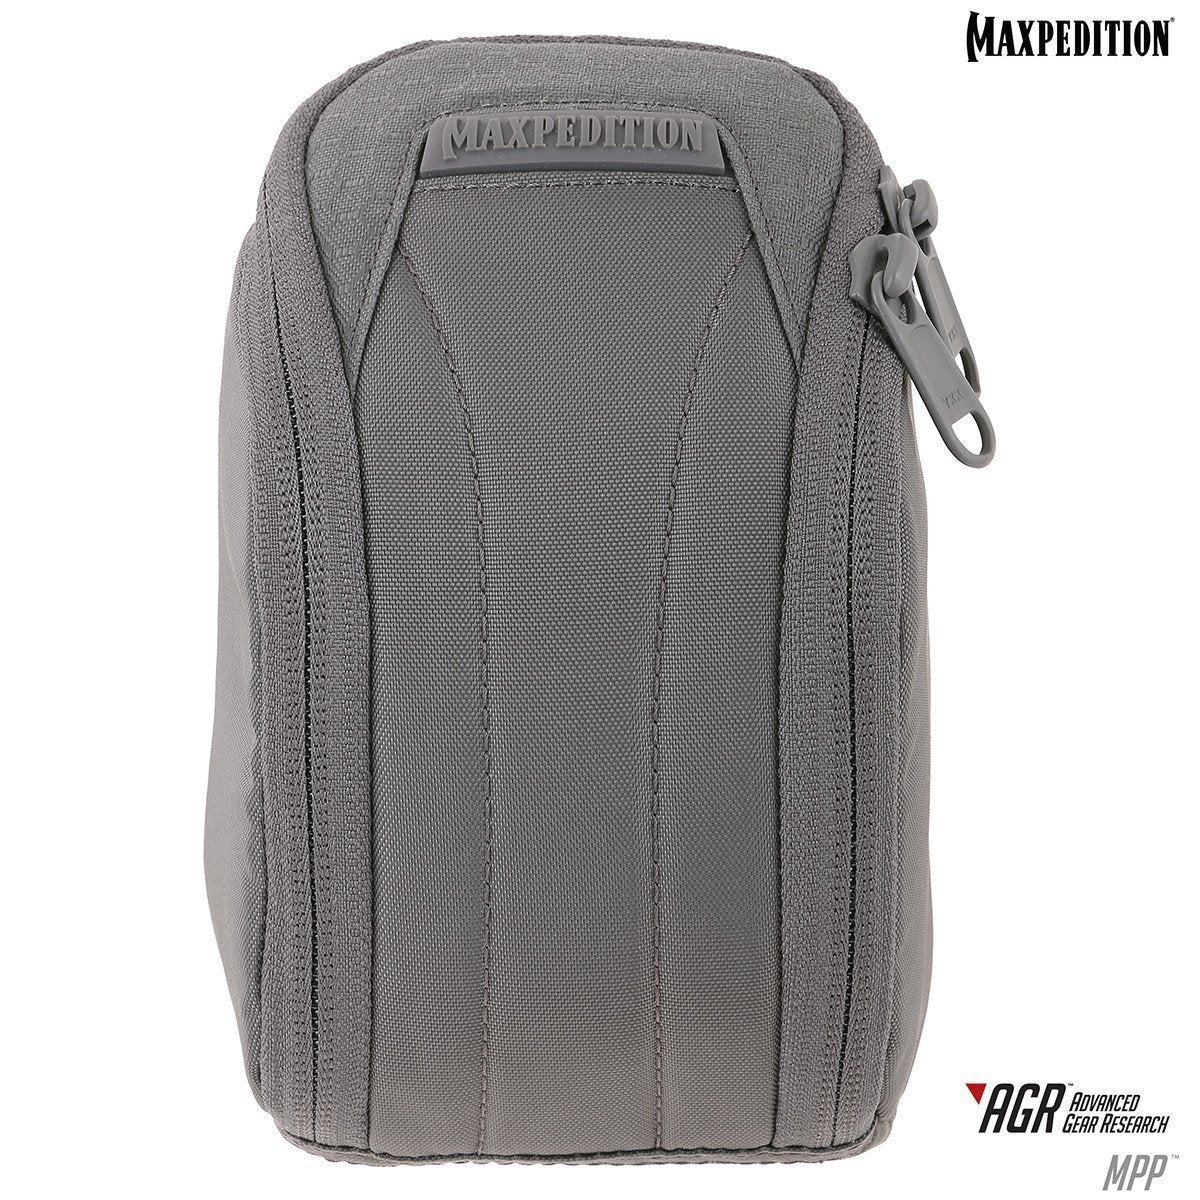 MPP™ Medium Padded Pouch | Maxpedition  Tactical Gear